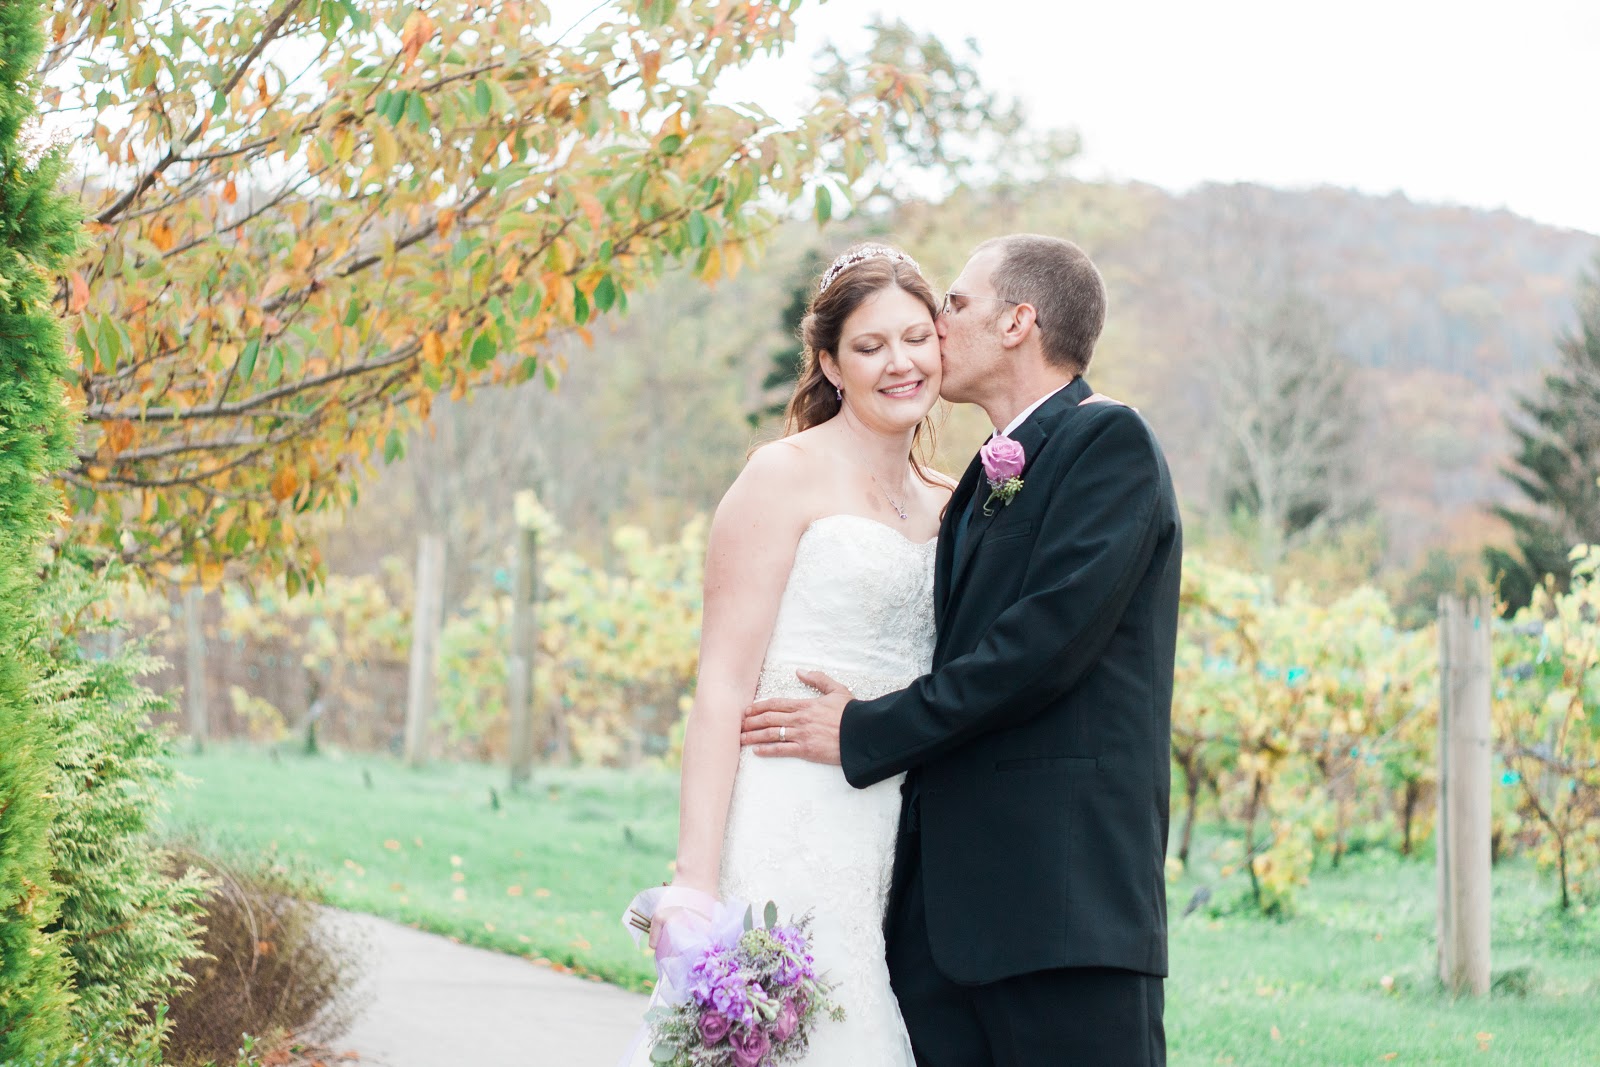 Wedding Photography Giveaway Hosted by Boone Photographer Wayfaring Wanderer